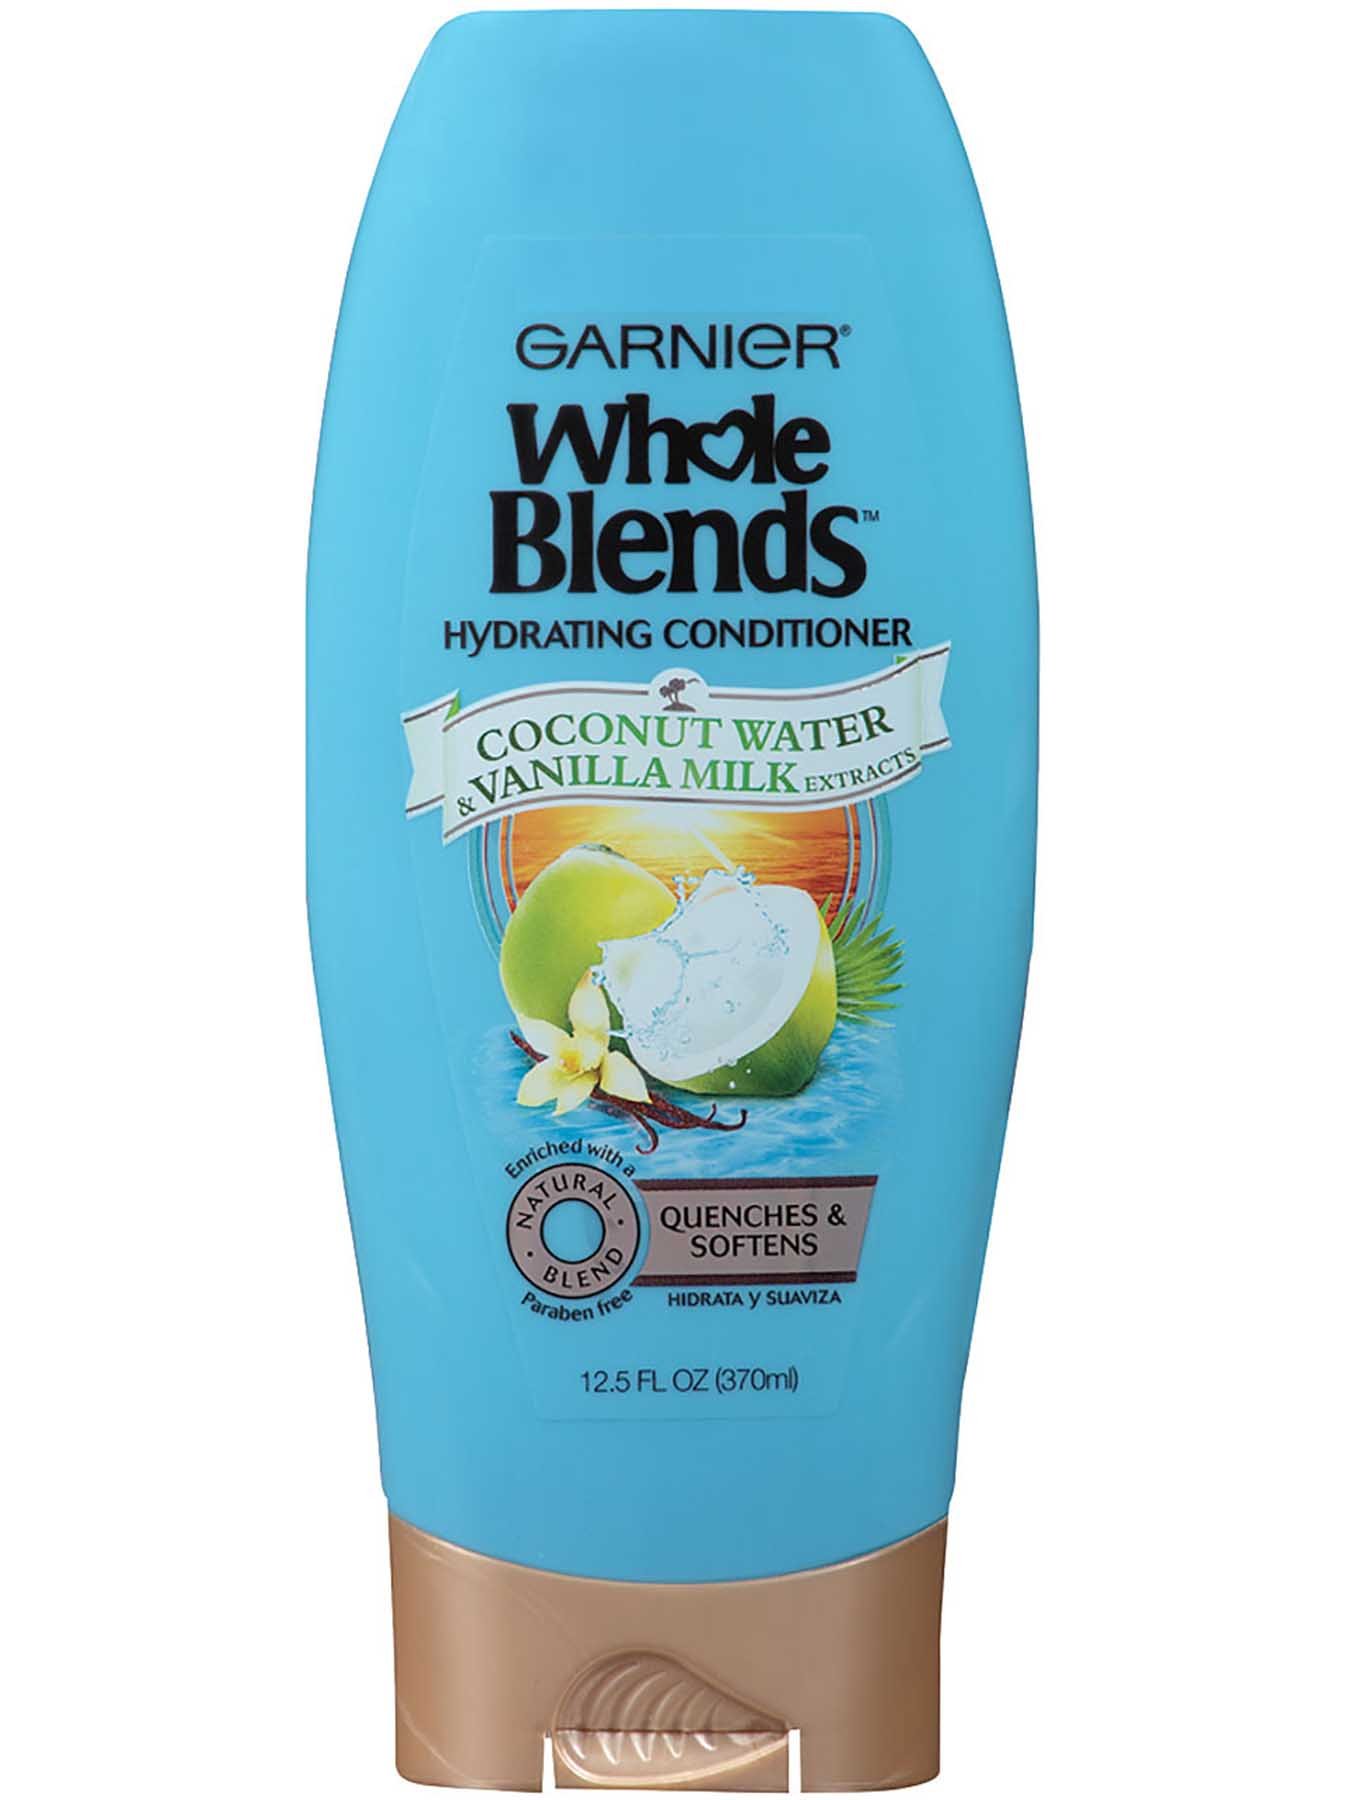 Front view of Hydrating Conditioner with Coconut Water and Vanilla Milk Extracts.